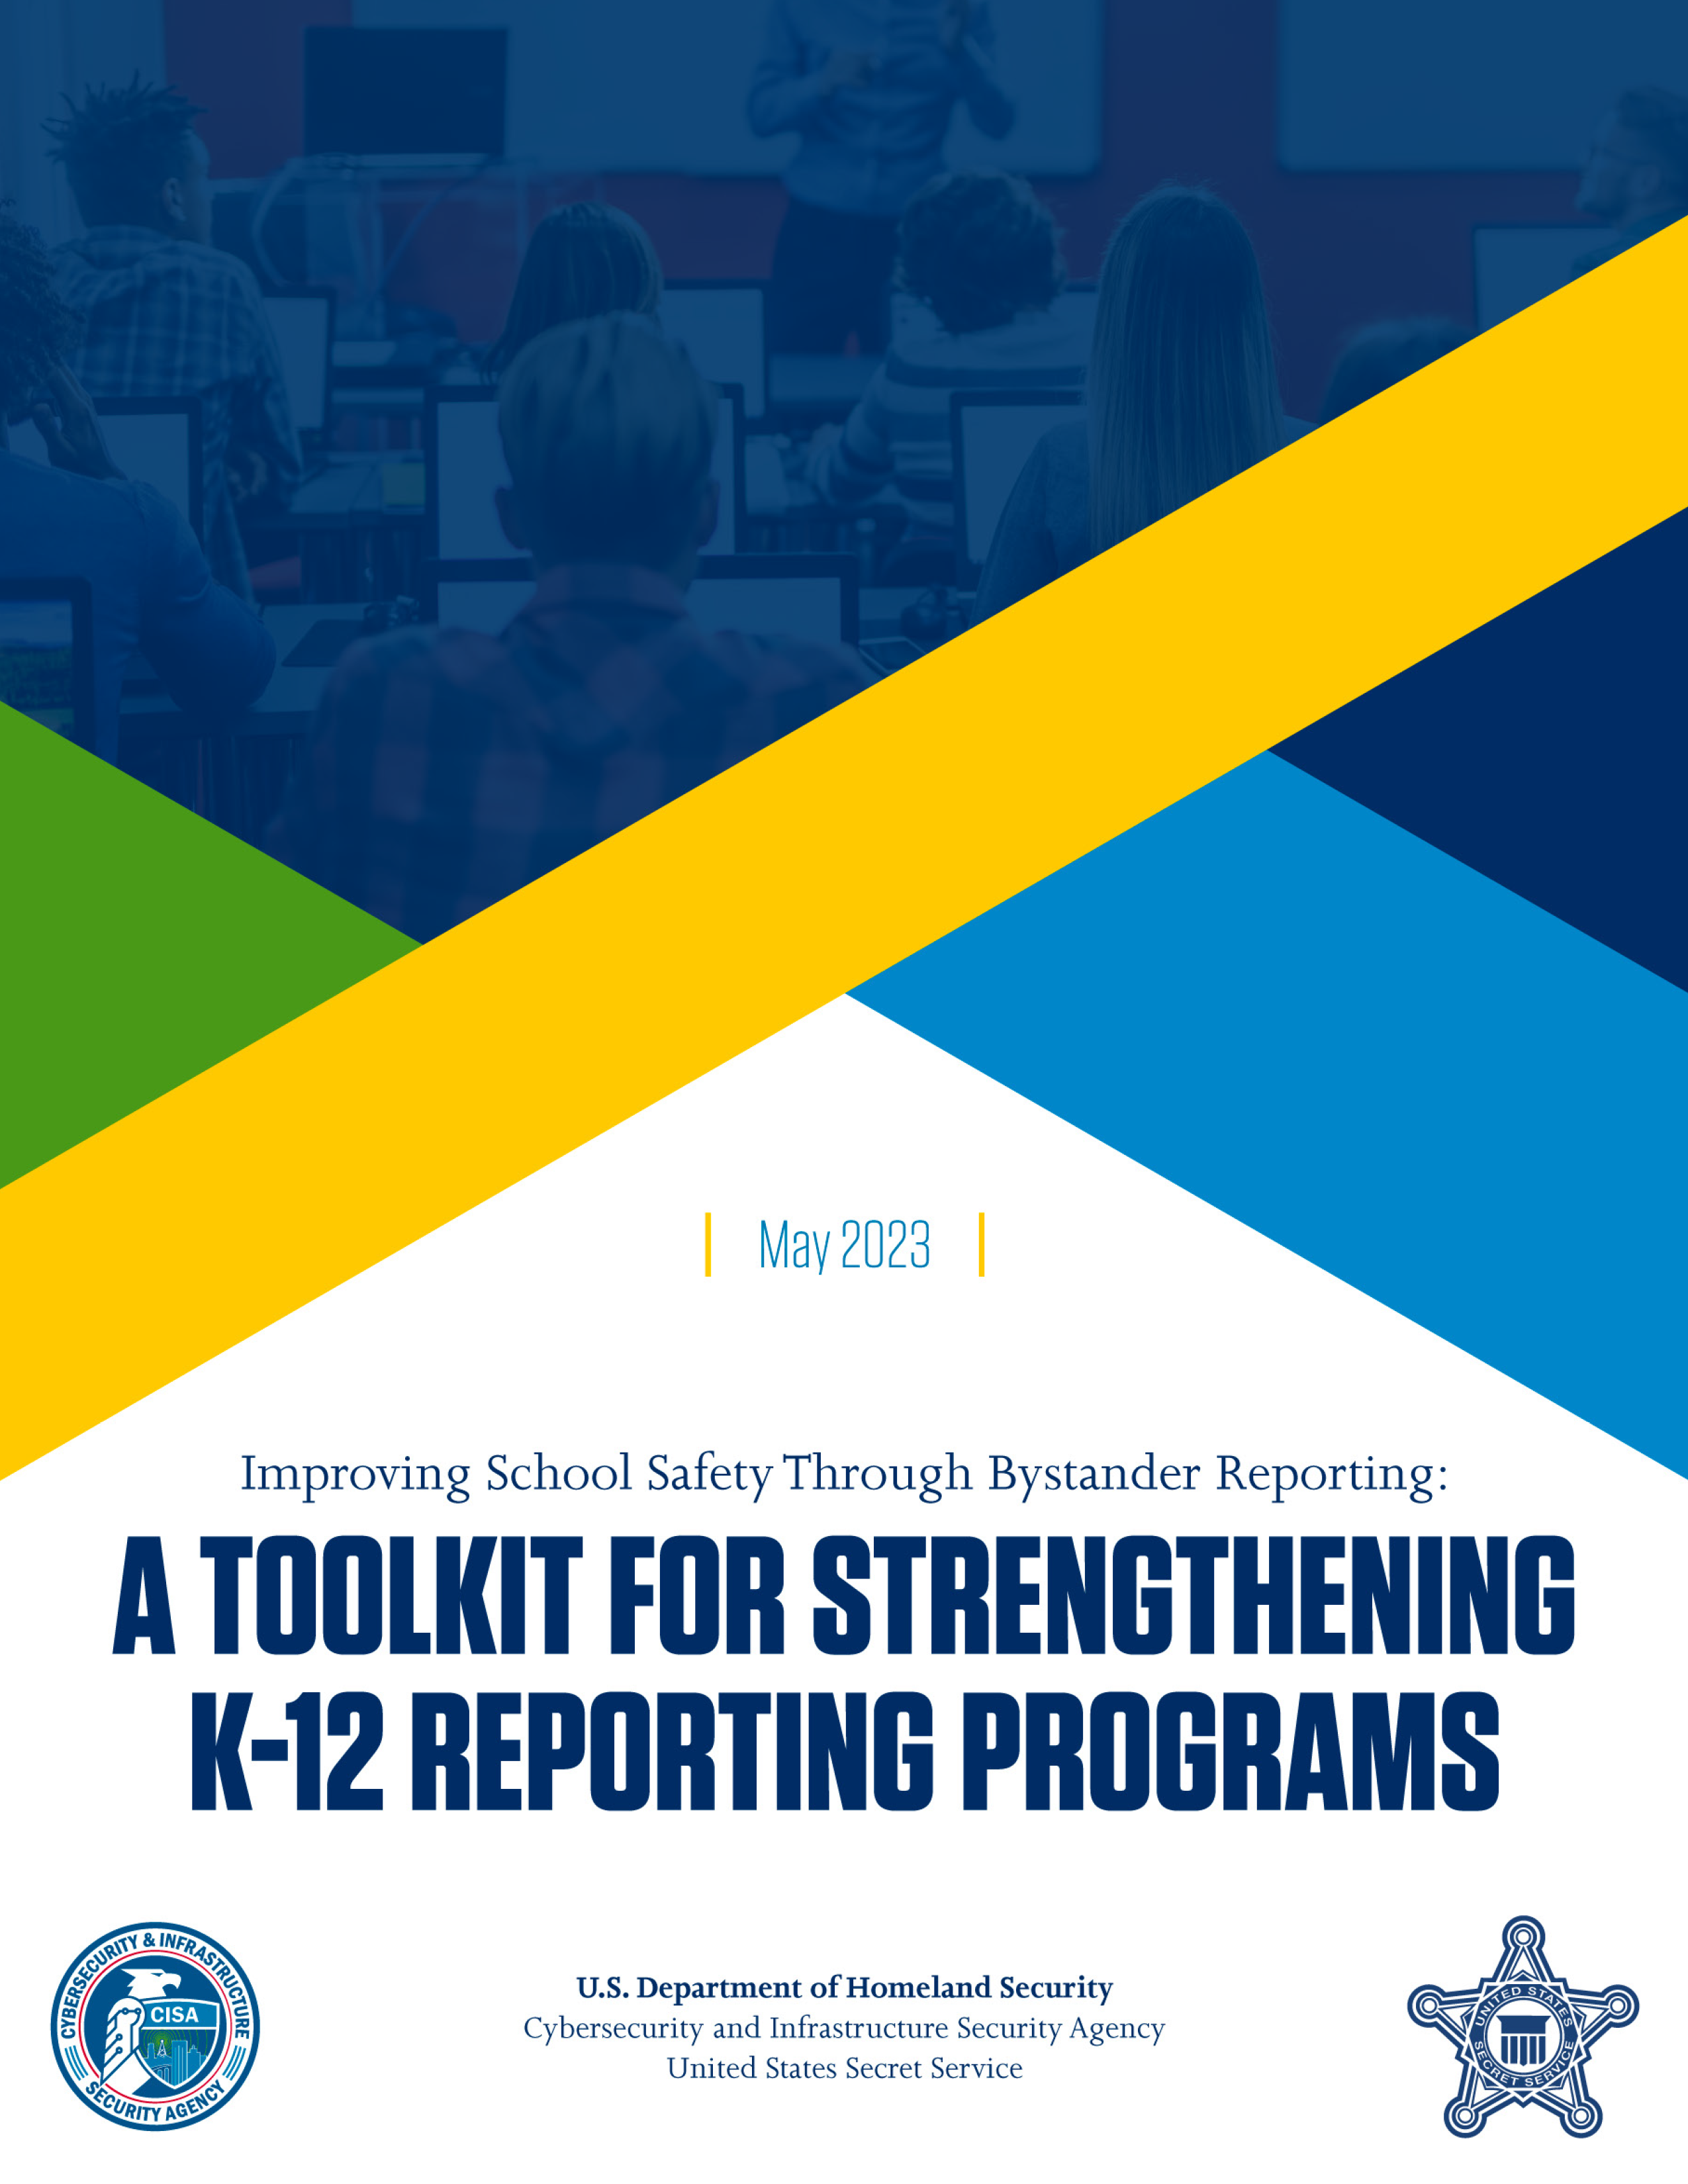 Improving School Safety Through Bystander Reporting: A Toolkit for Strengthening K-12 Reporting Programs